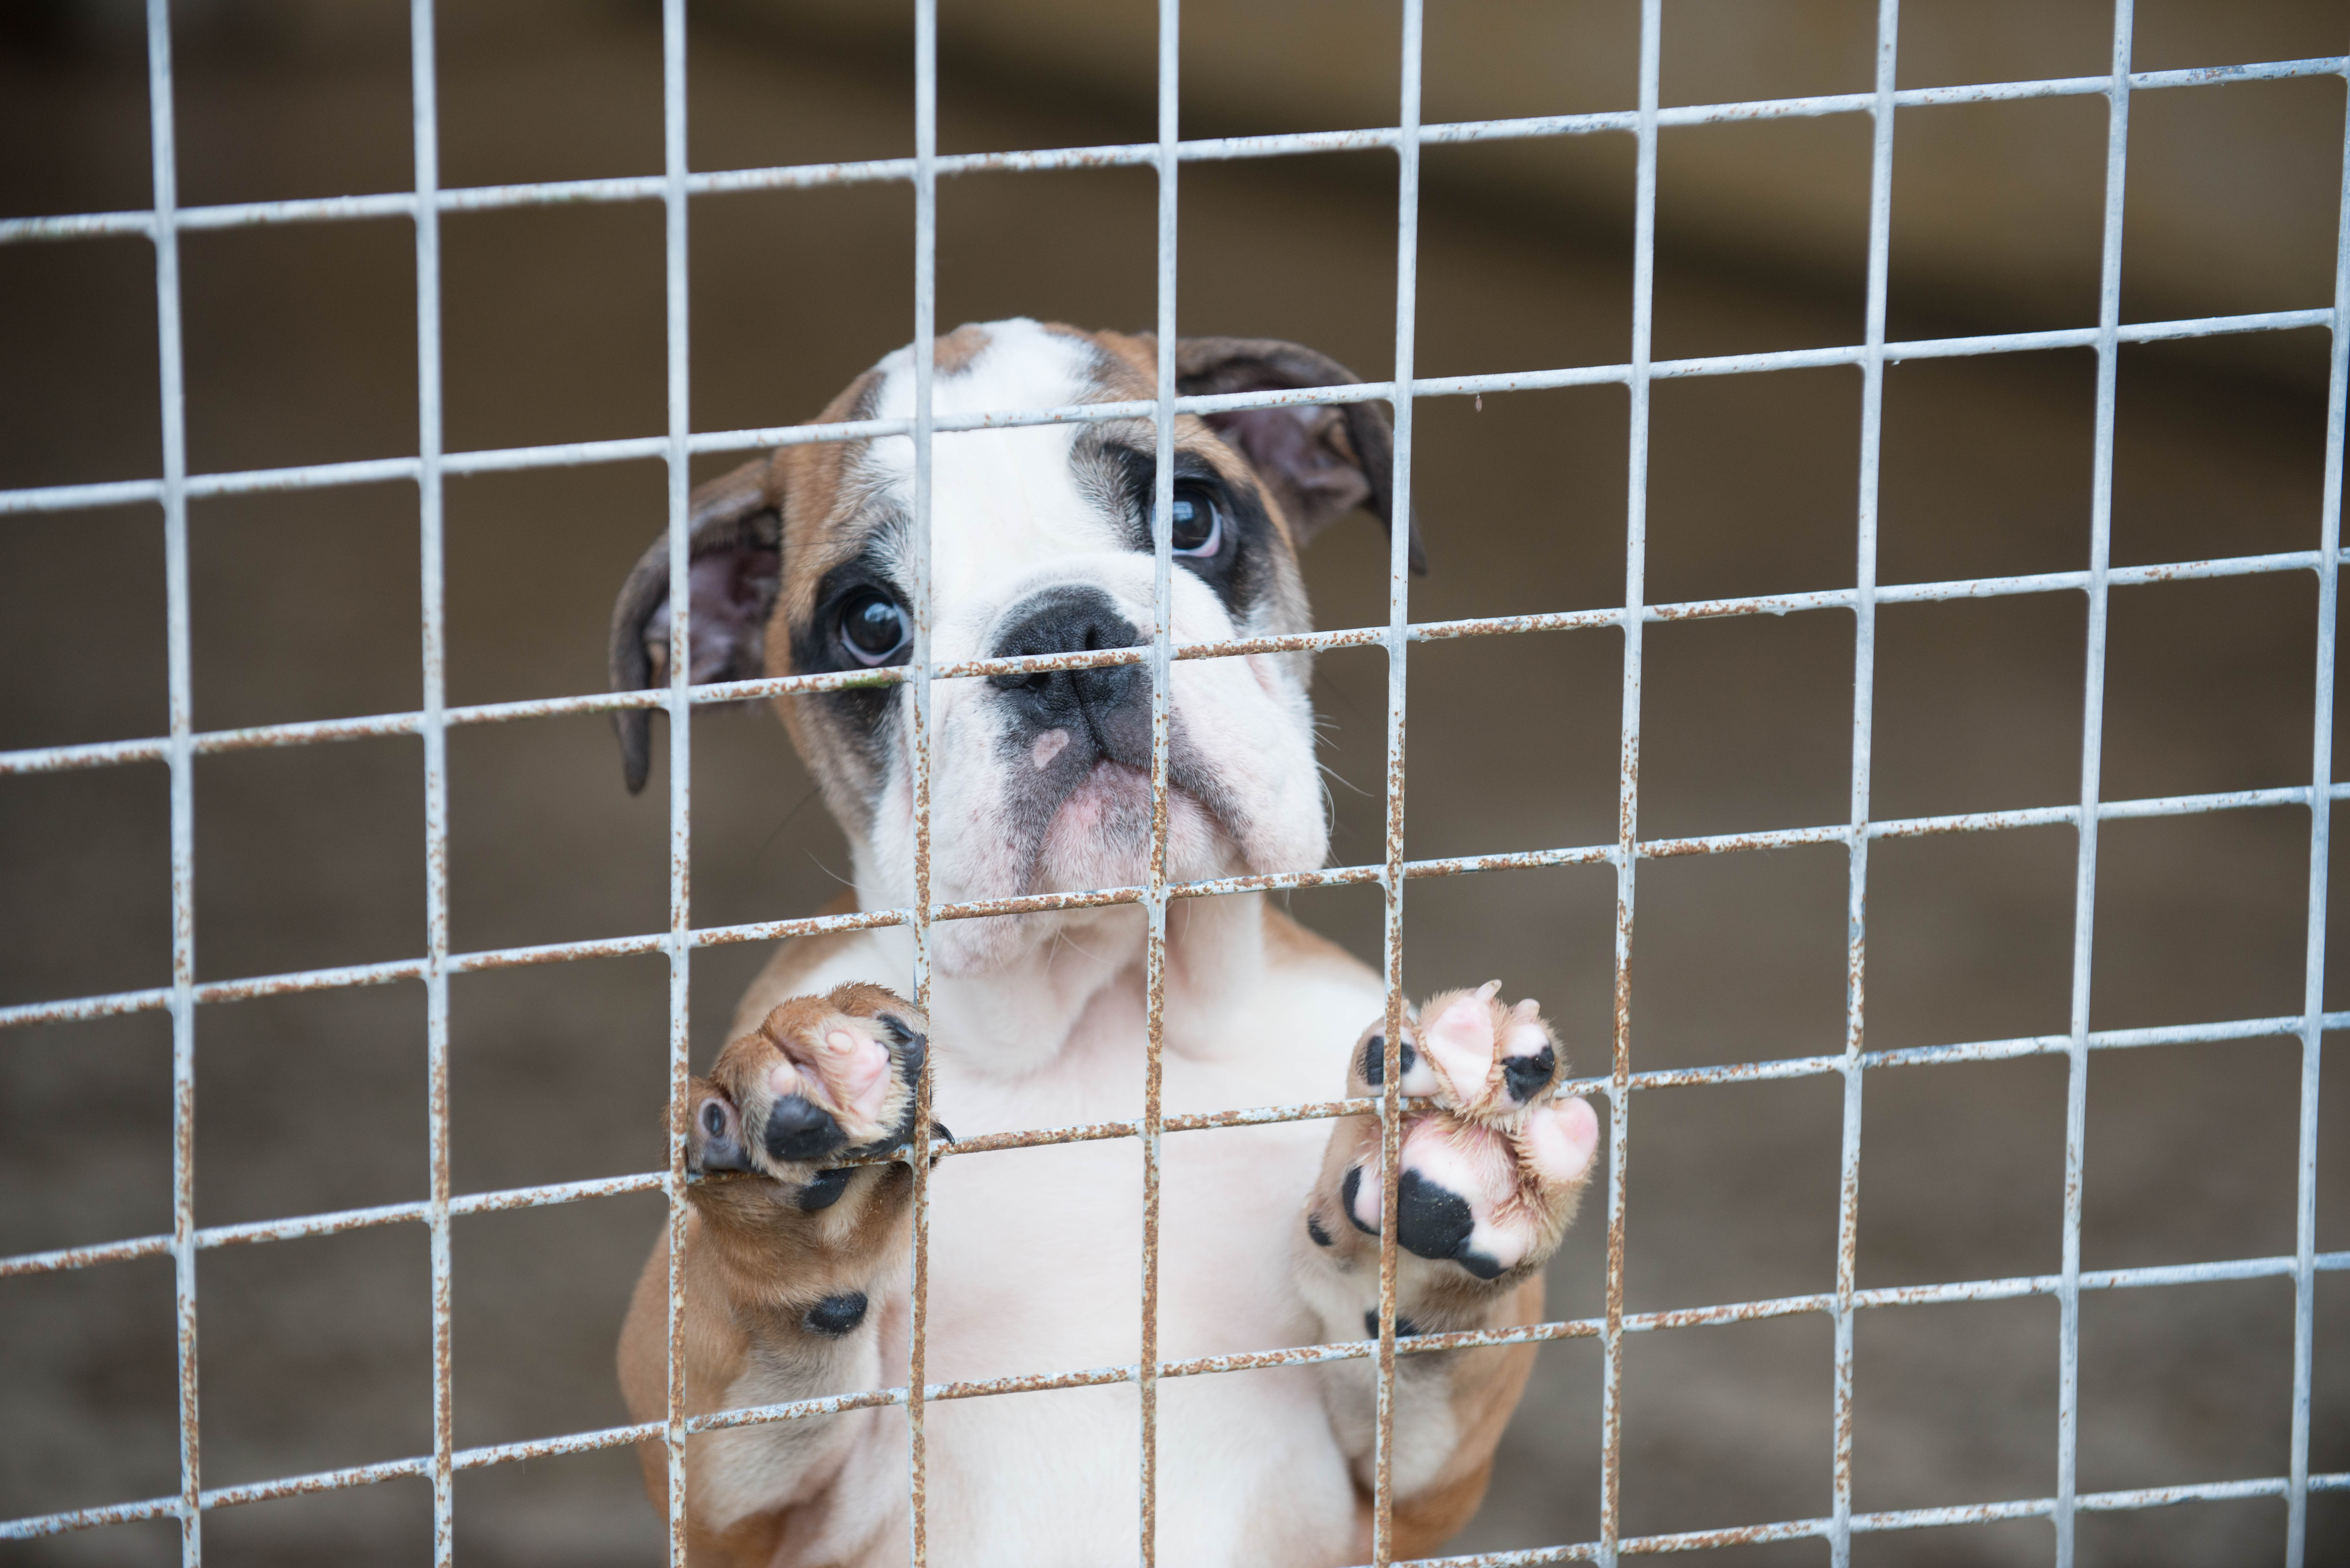 Response from European Commission on Illegal Trade in Companion Animals